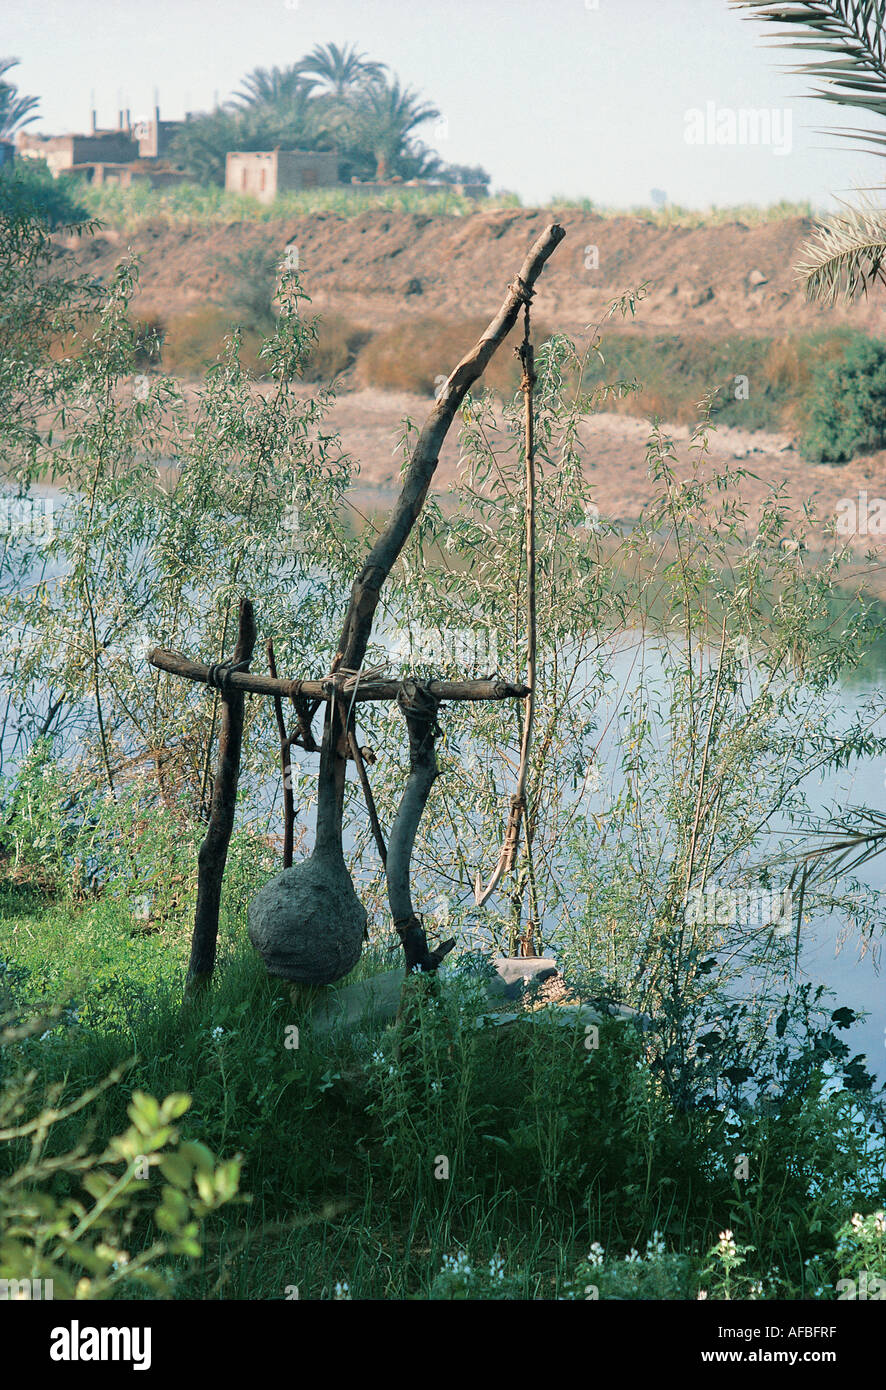 Traditional boom type irrigation on the bank of the river Nile Egypt Stock Photo